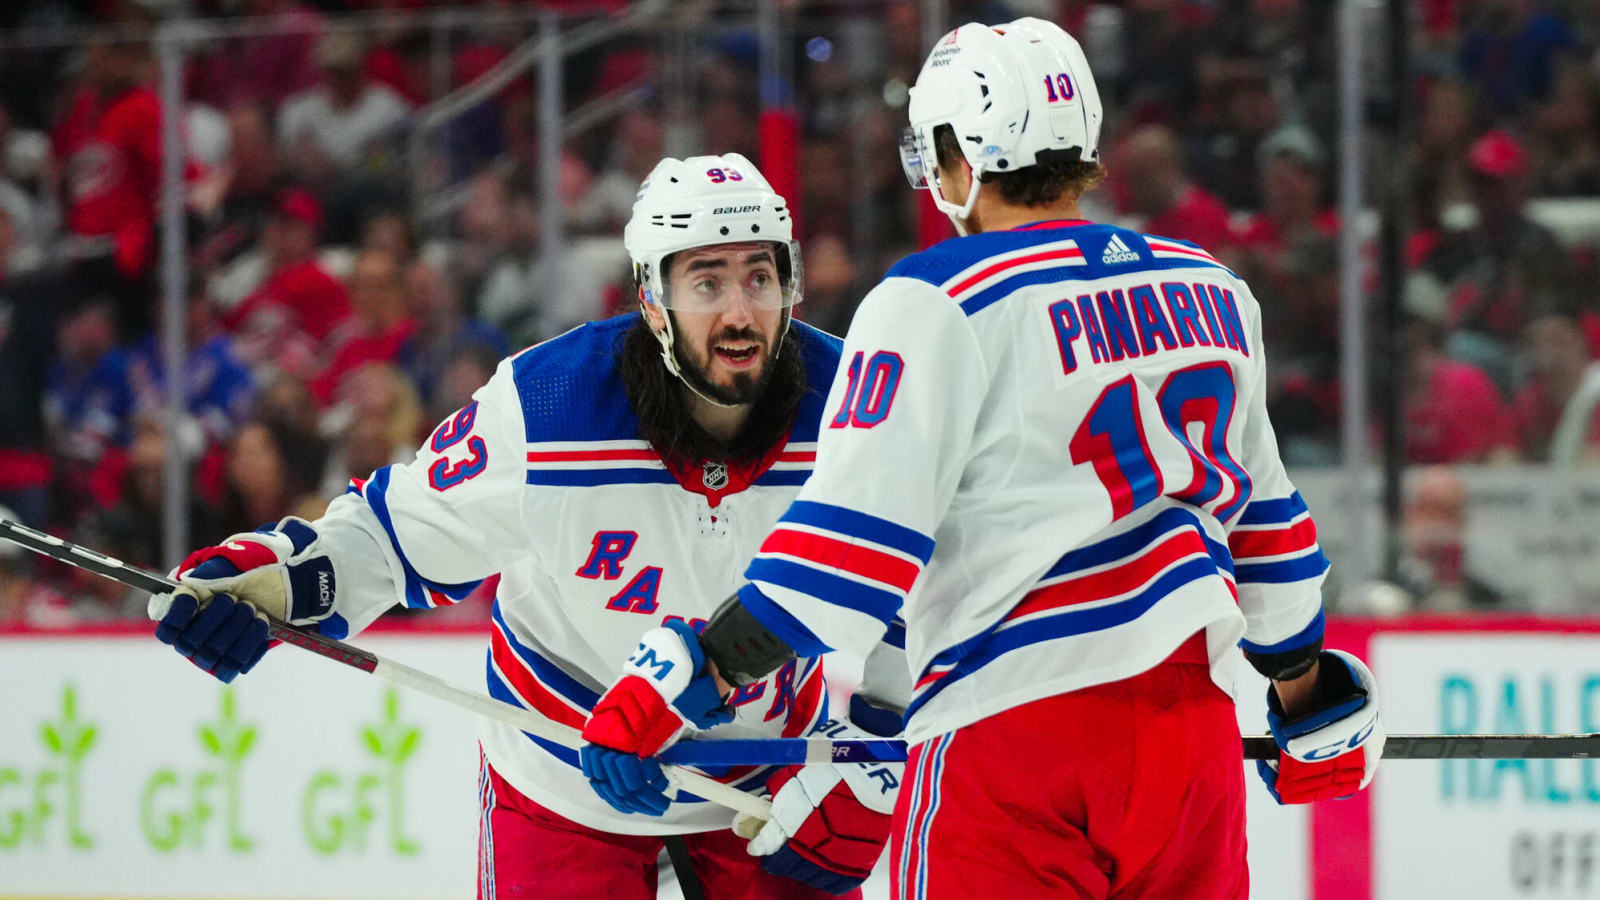 Rangers win historic seventh playoff game in a row in dramatic fashion